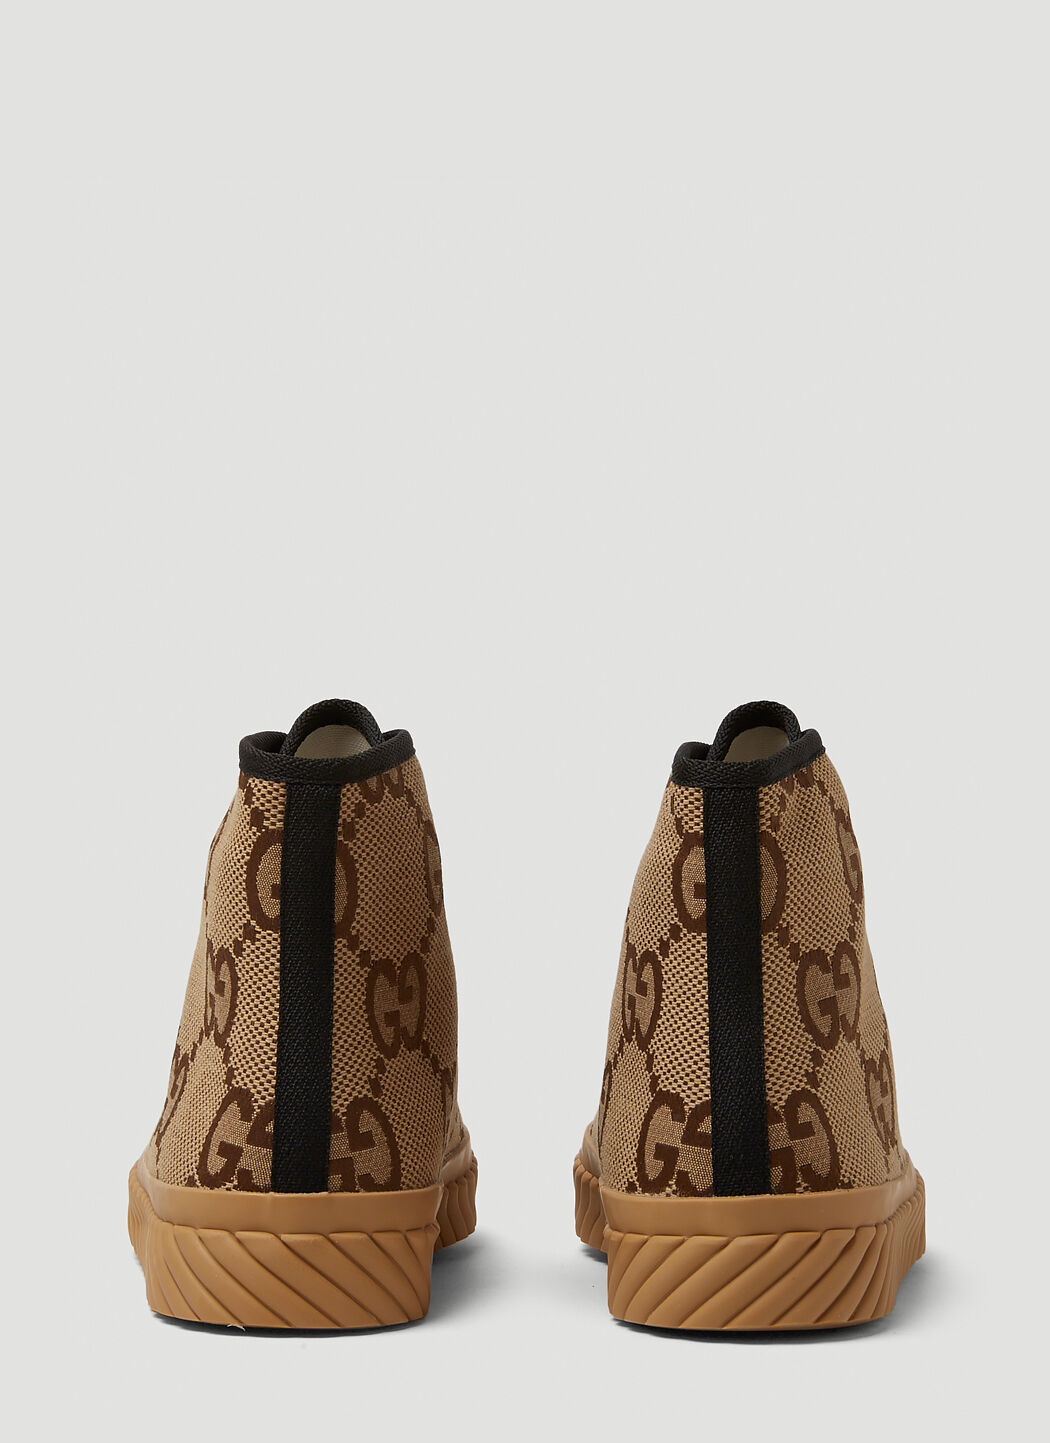 Gucci Tortuga High Top Sneakers in Camel | LN-CC